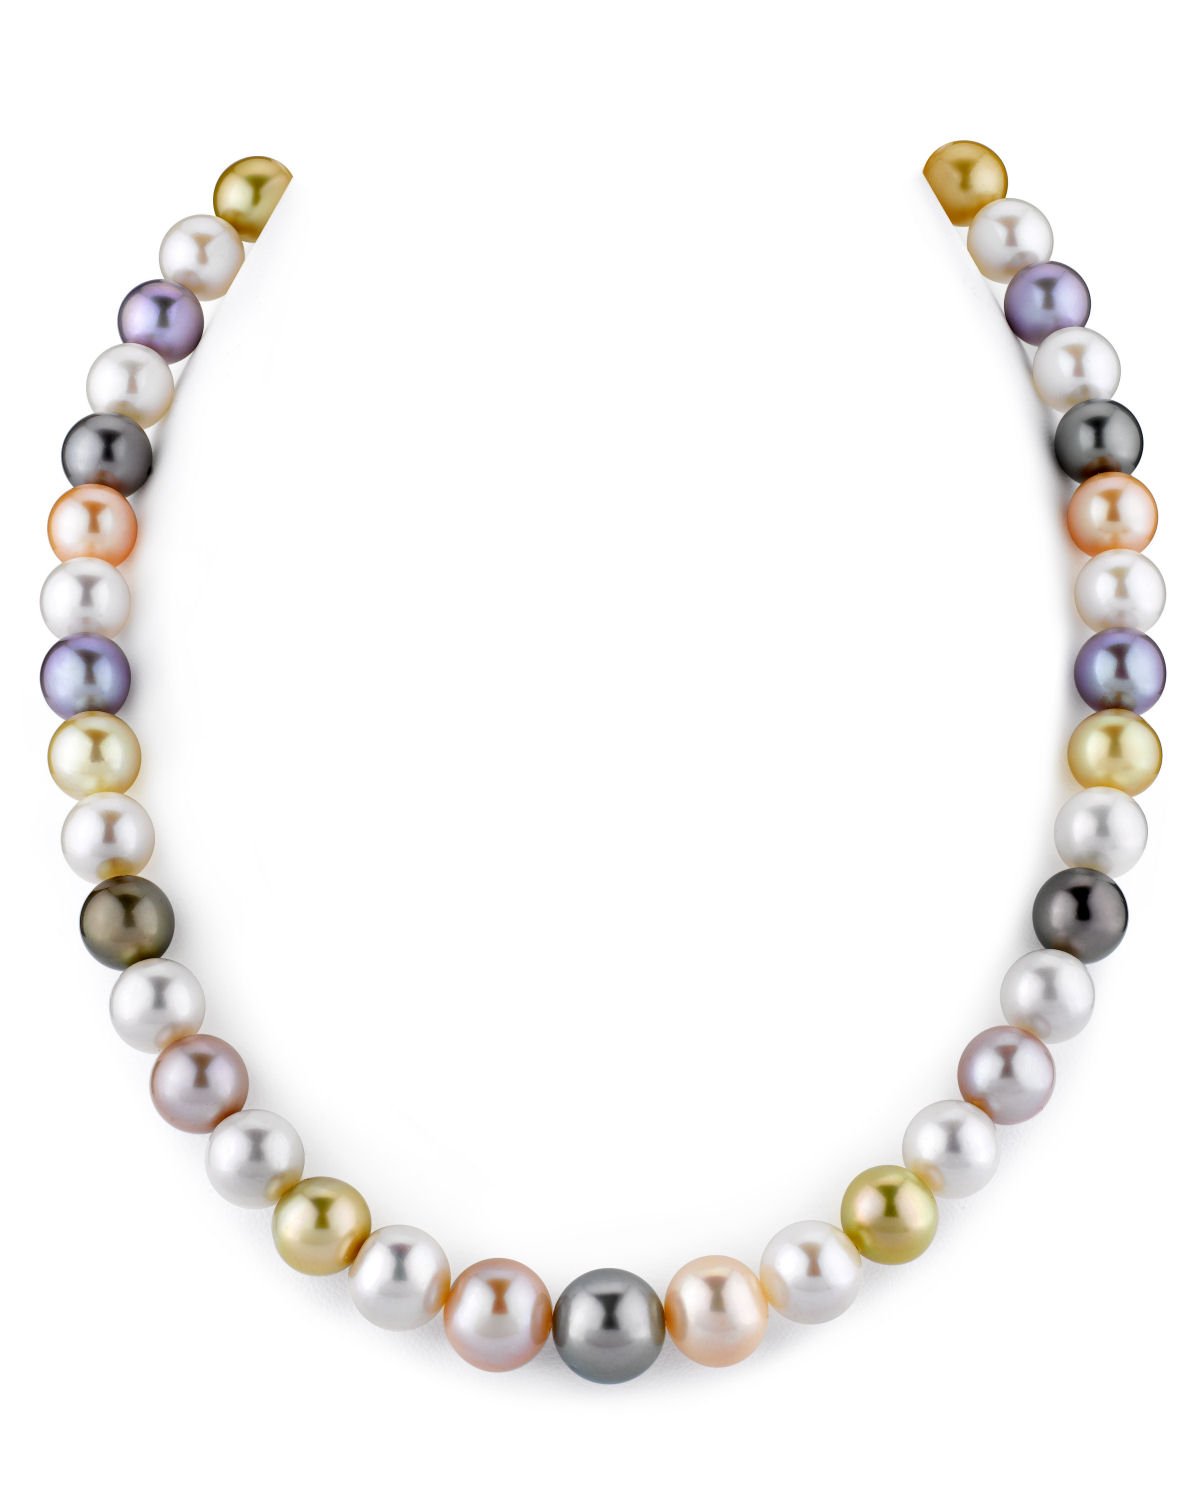 Pearl Necklace, Pearls, Multi Strand Pearl Necklace - Gem